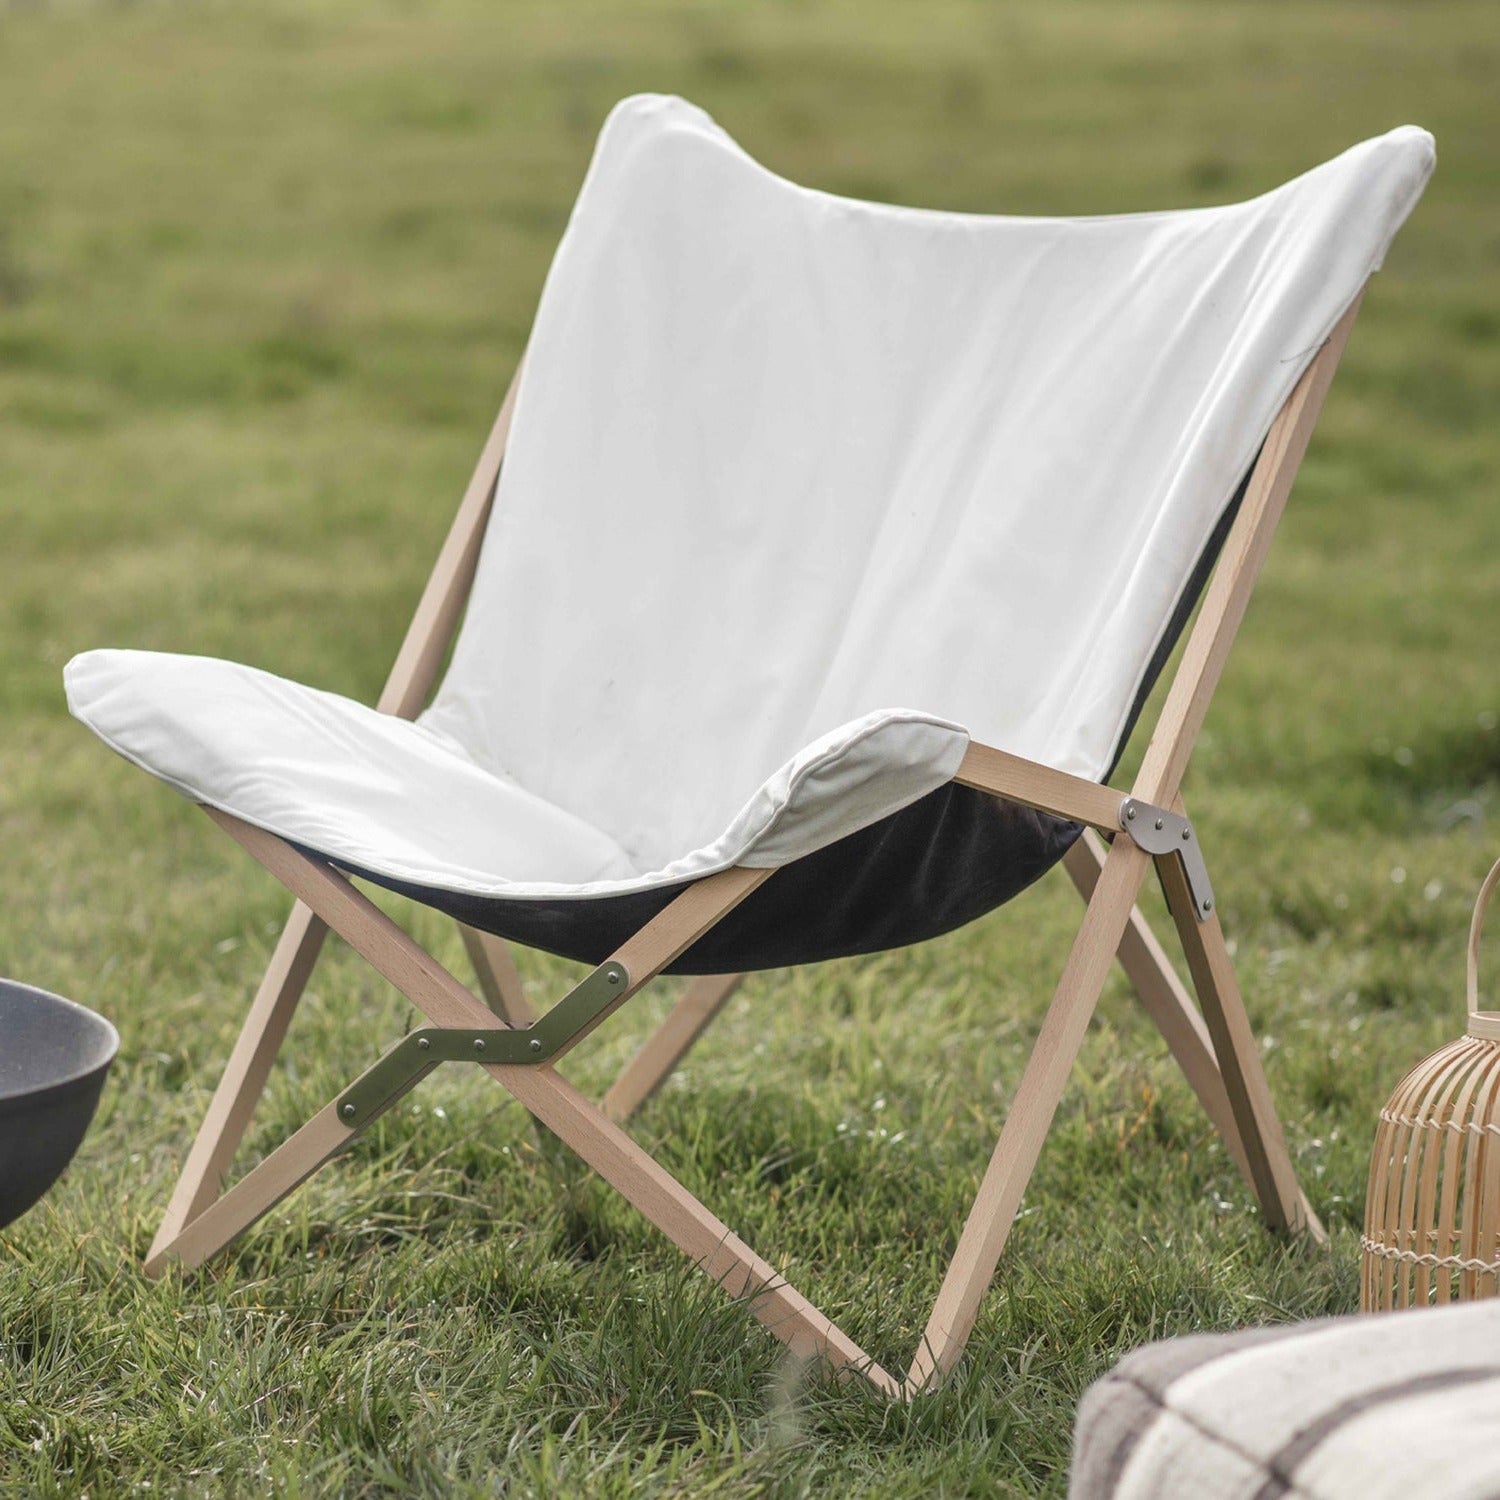 Wimborne Butterfly Outdoor Chair by Garden Trading